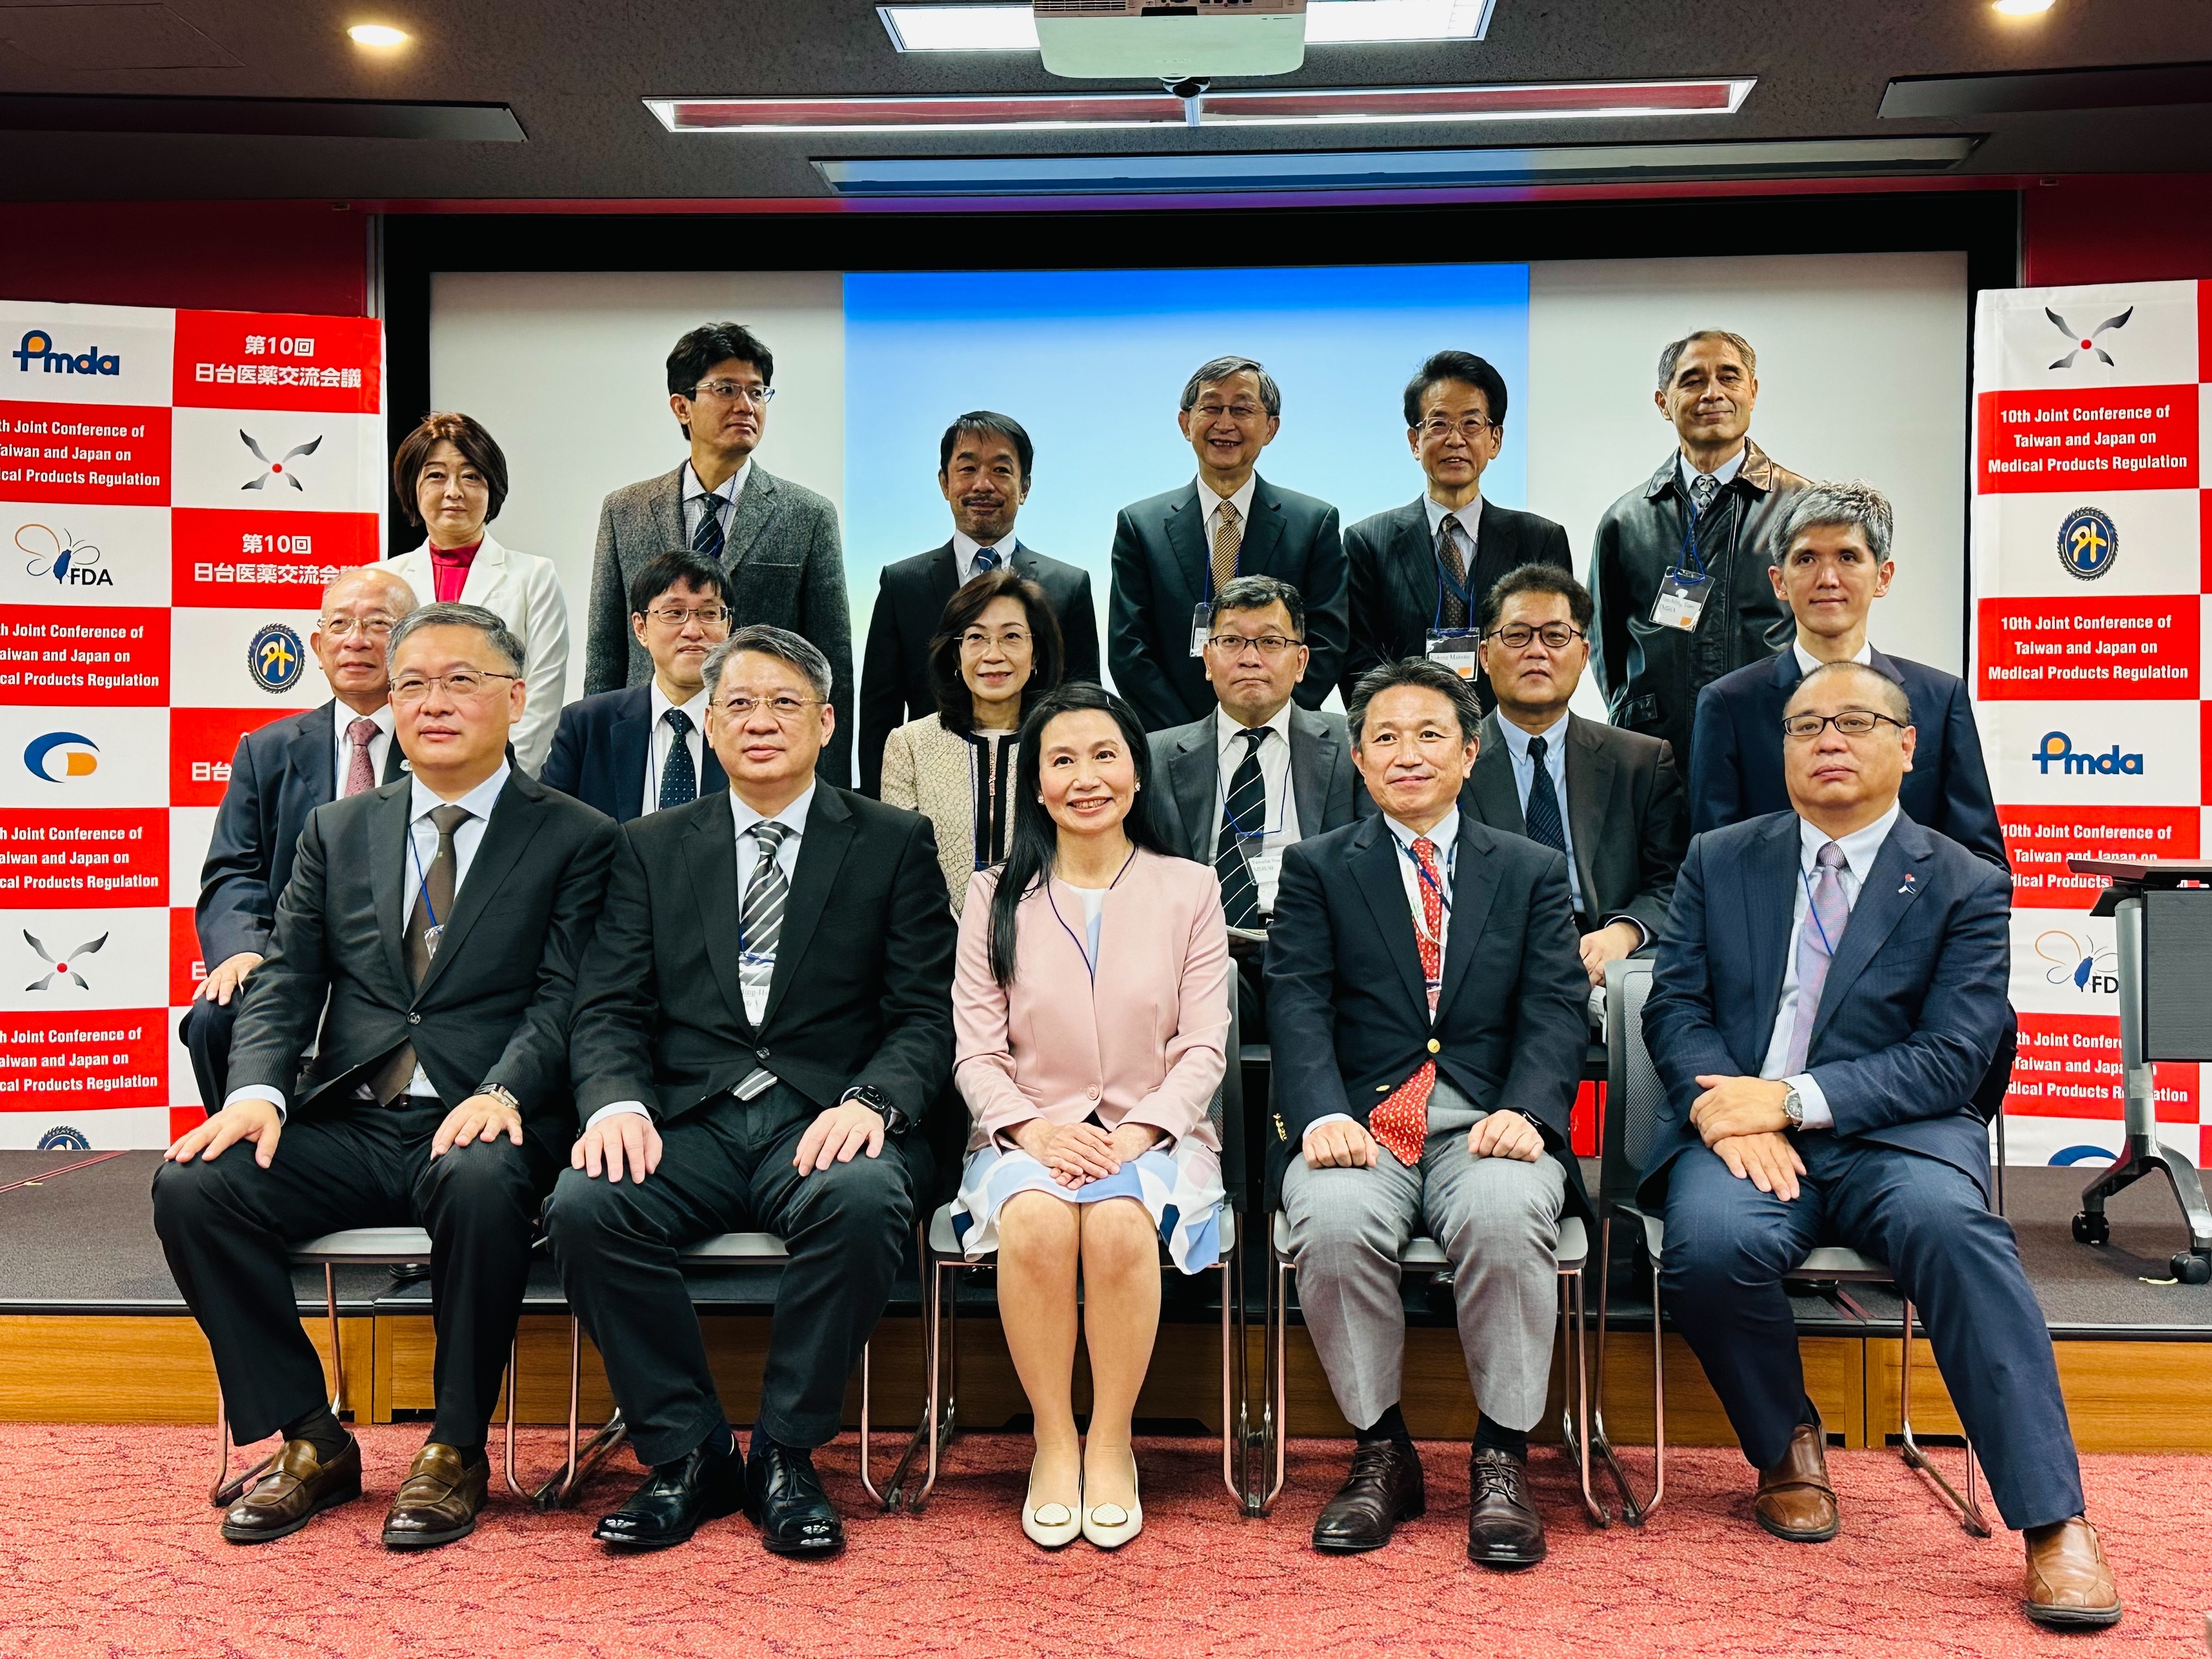 The 10th Joint Conference of Taiwan and Japan on Medical Products Regulation on October 20th, 2022